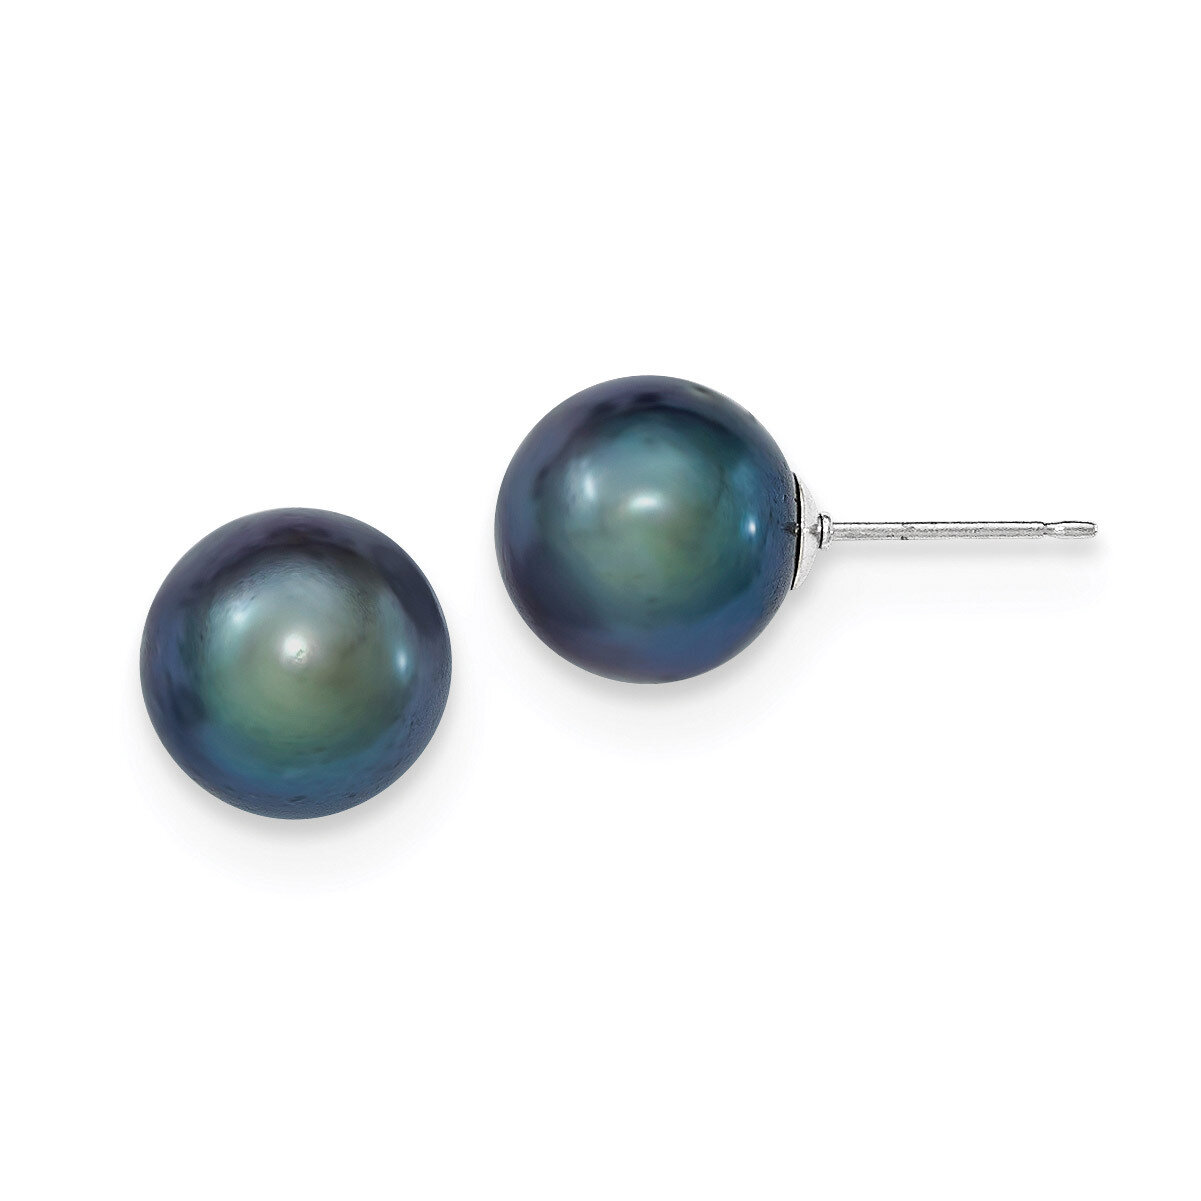 10-11mm Black Freshwater Cultured Round Pearl Stud Earrings Sterling Silver QE12706